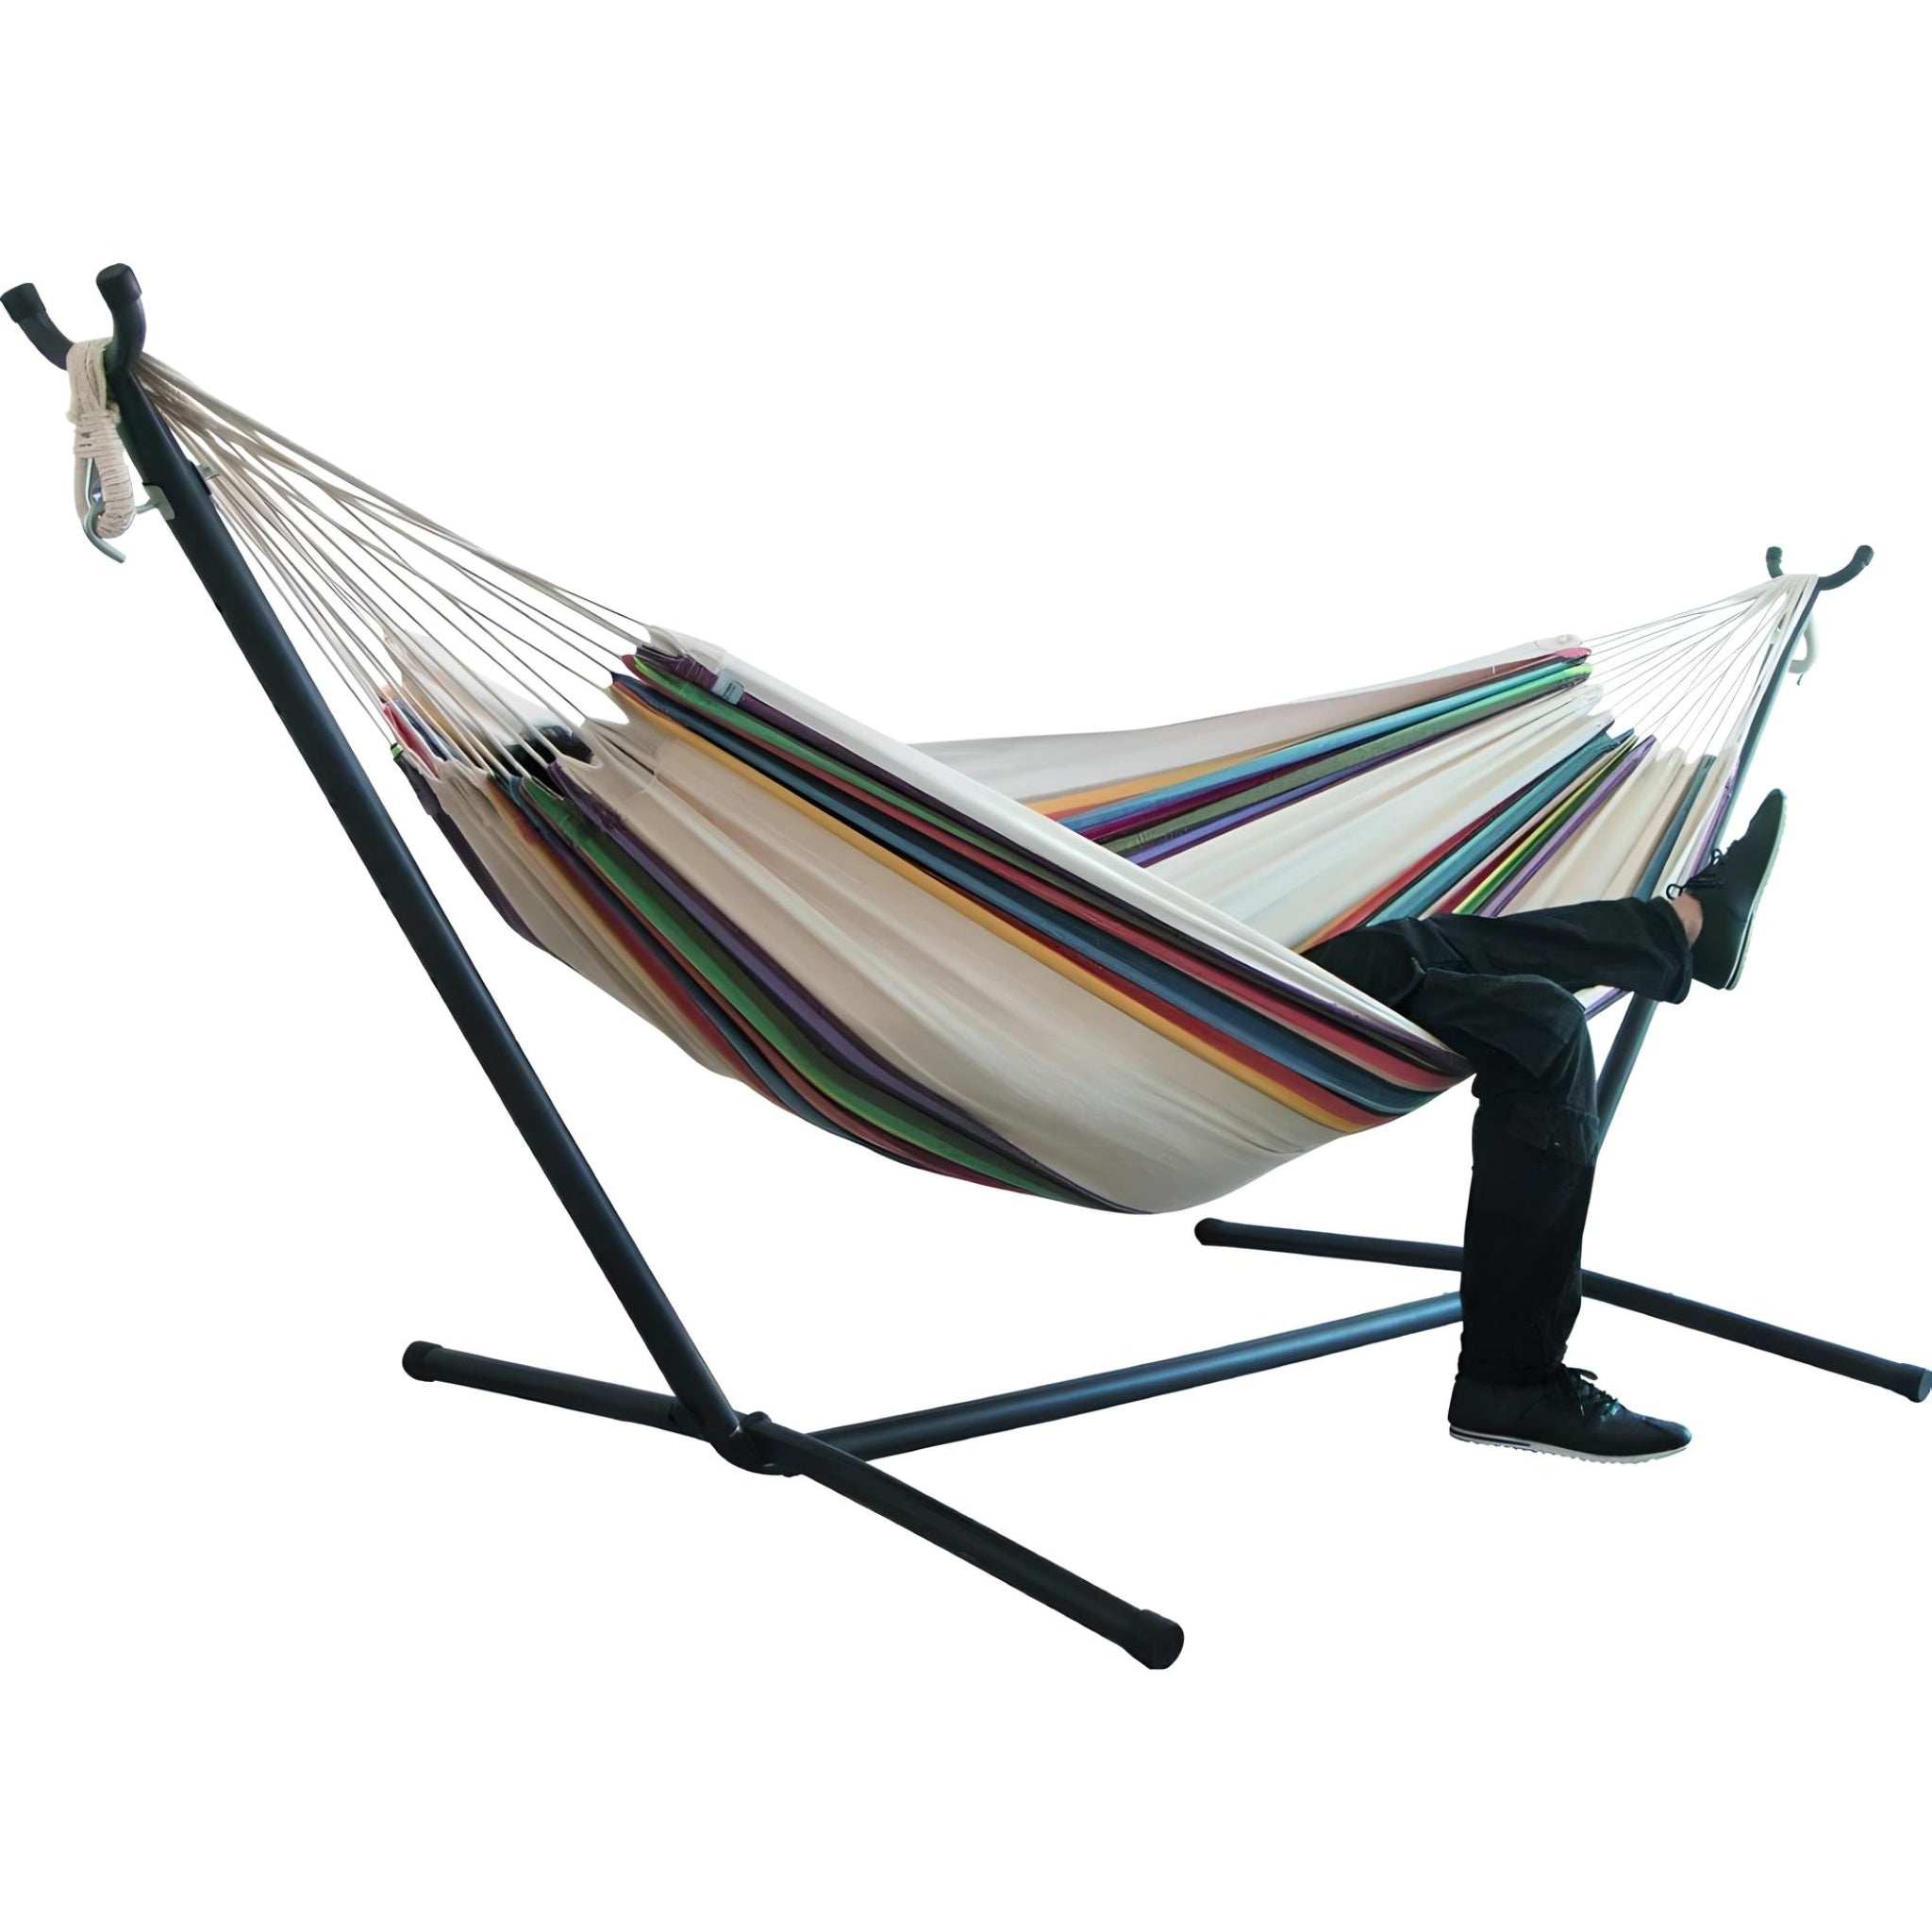 large-hammock-bed-white-green